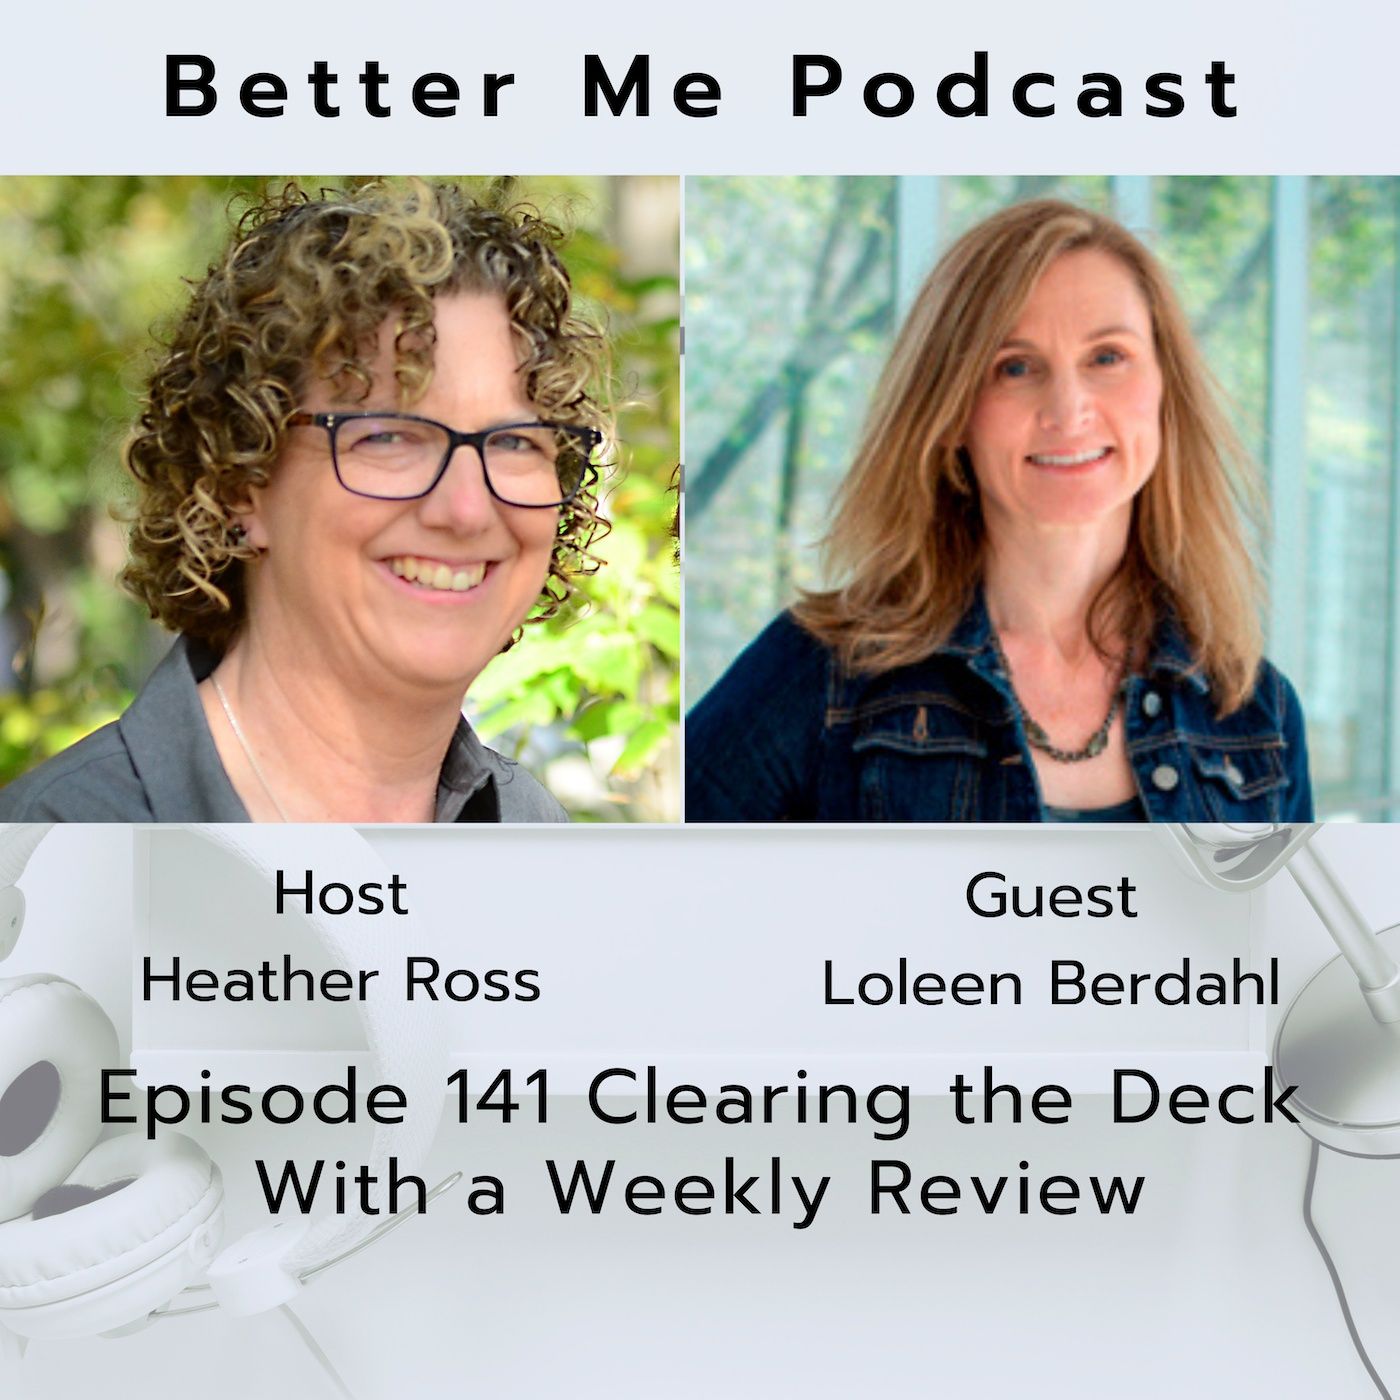 EP 141 Clearing the Deck With a Weekly Review (with guest Loleen Berdahl)